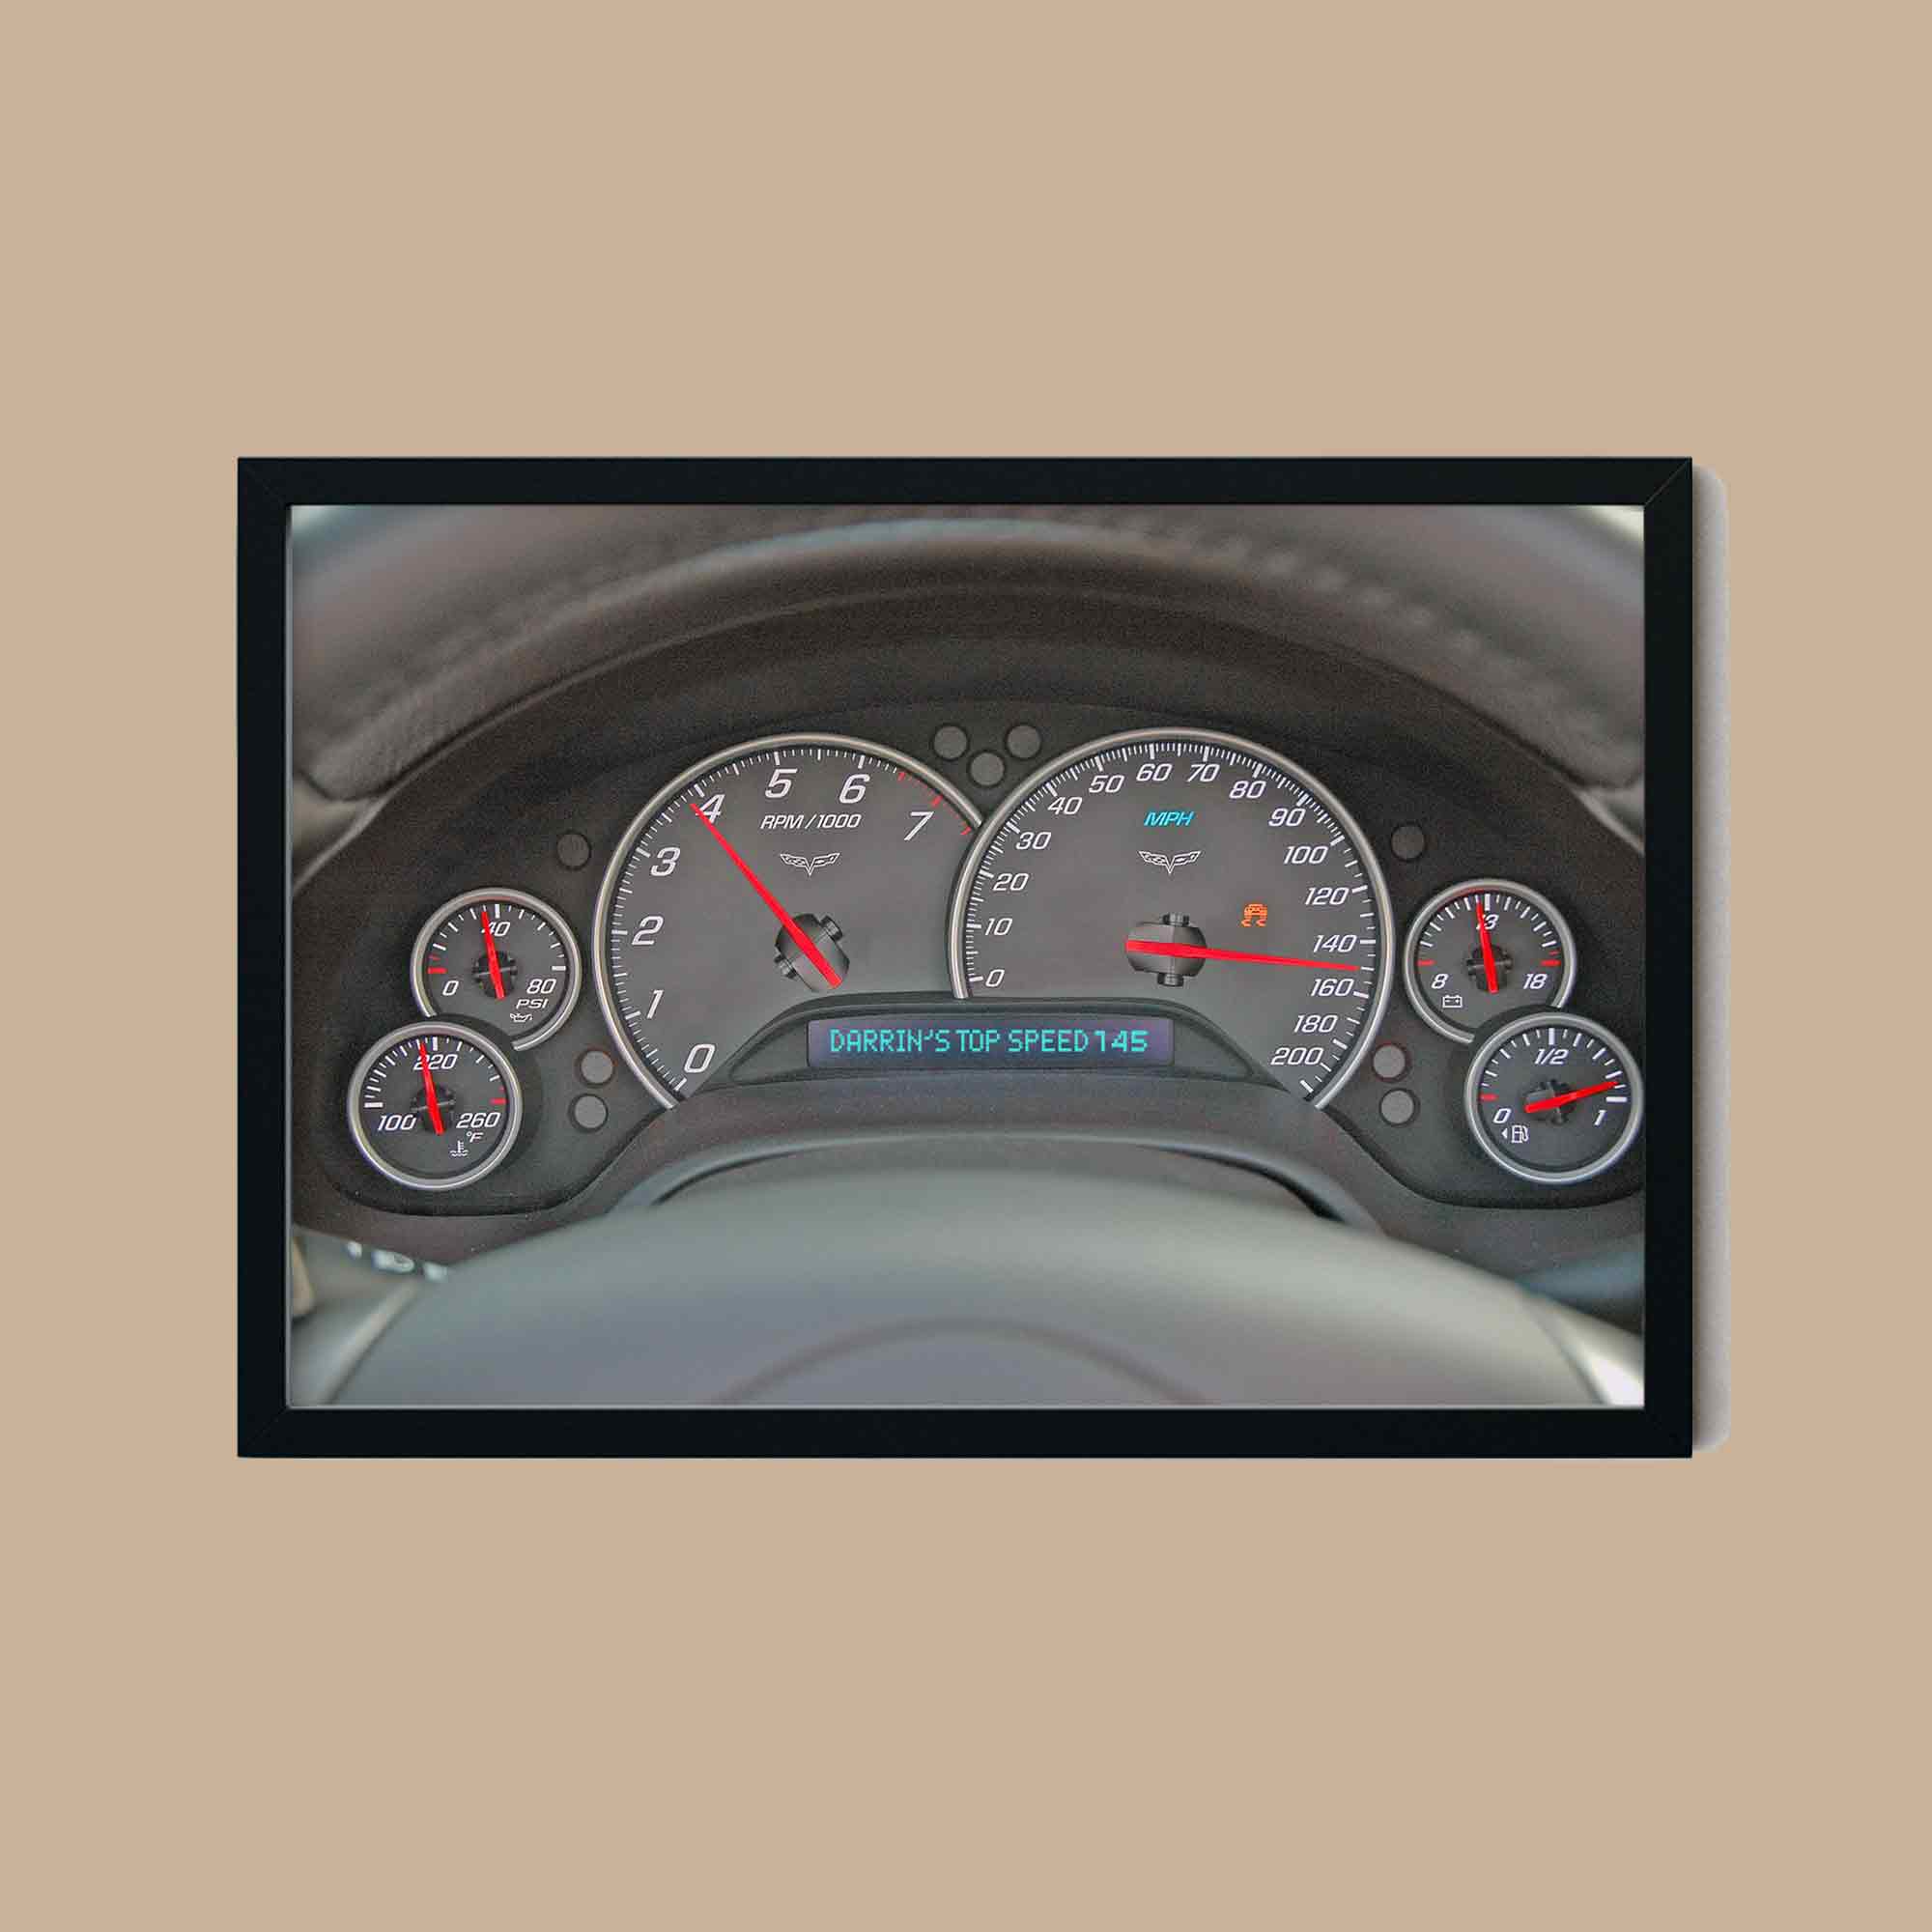 Personalized C6 Corvette Dash Print with Top Speed & Driver Name - Vette1 - C6 Wall Art